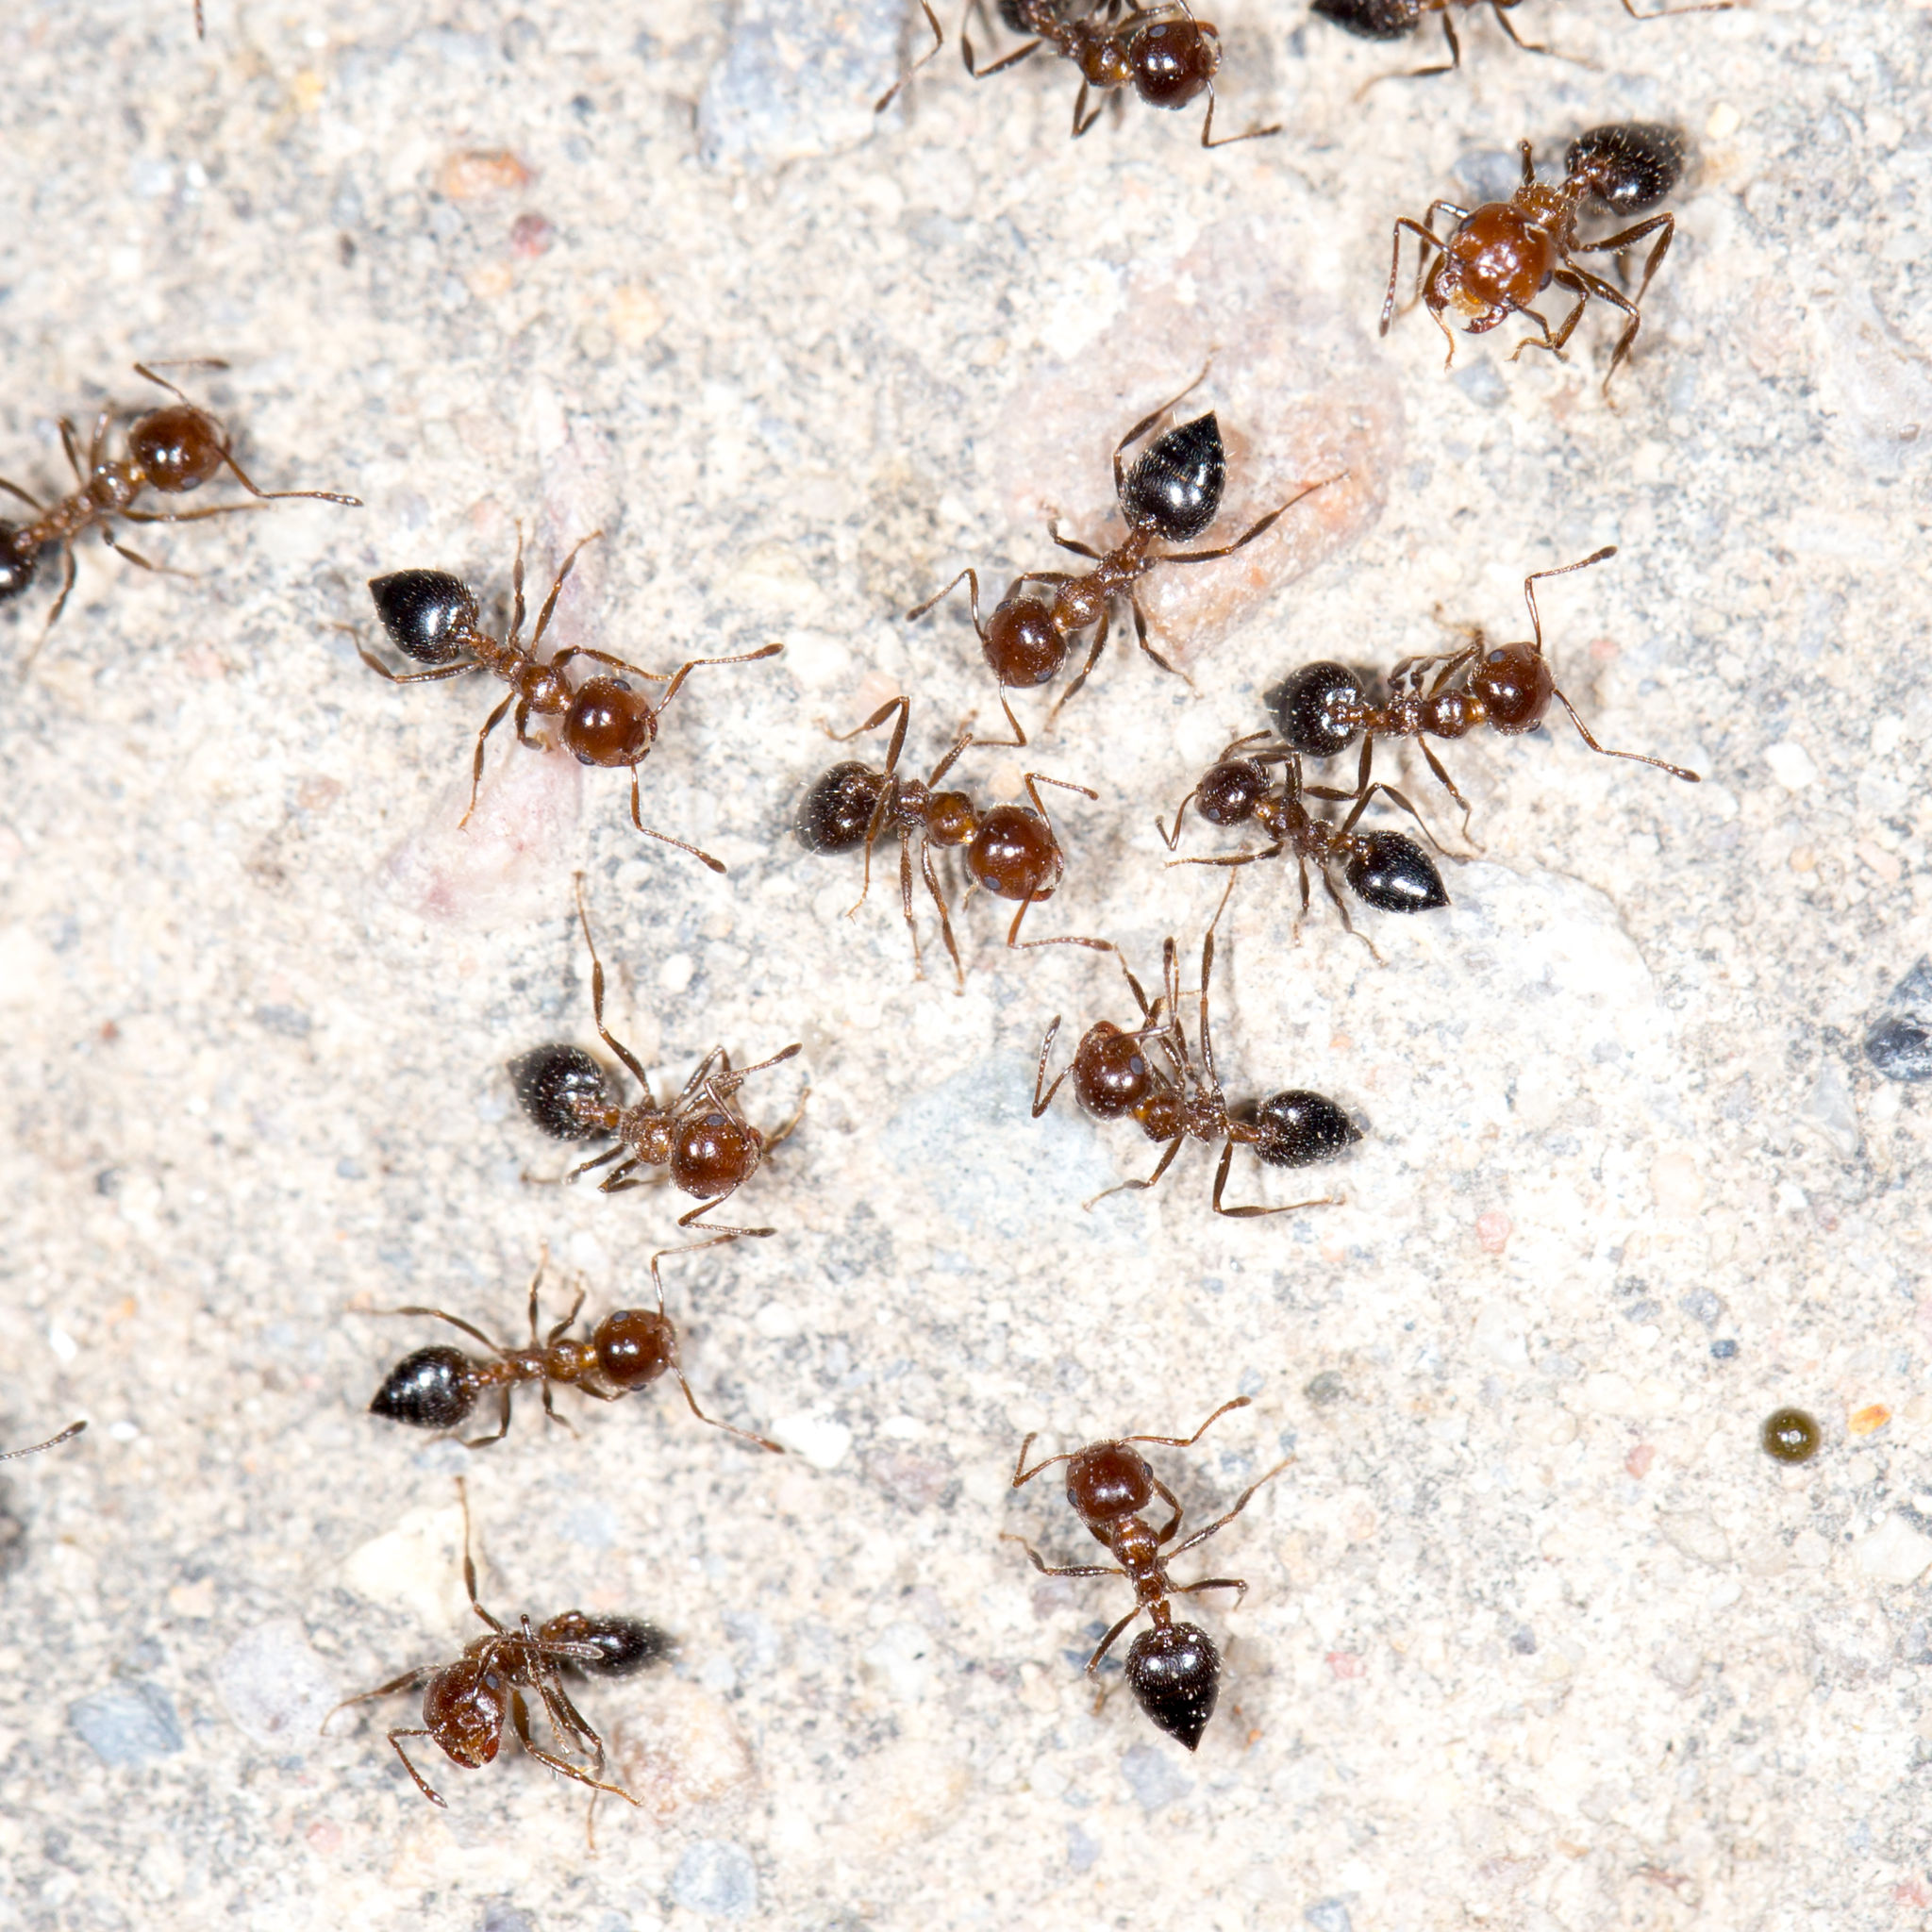 How to Get Rid of Ants With Pest Control in Columbia, MD